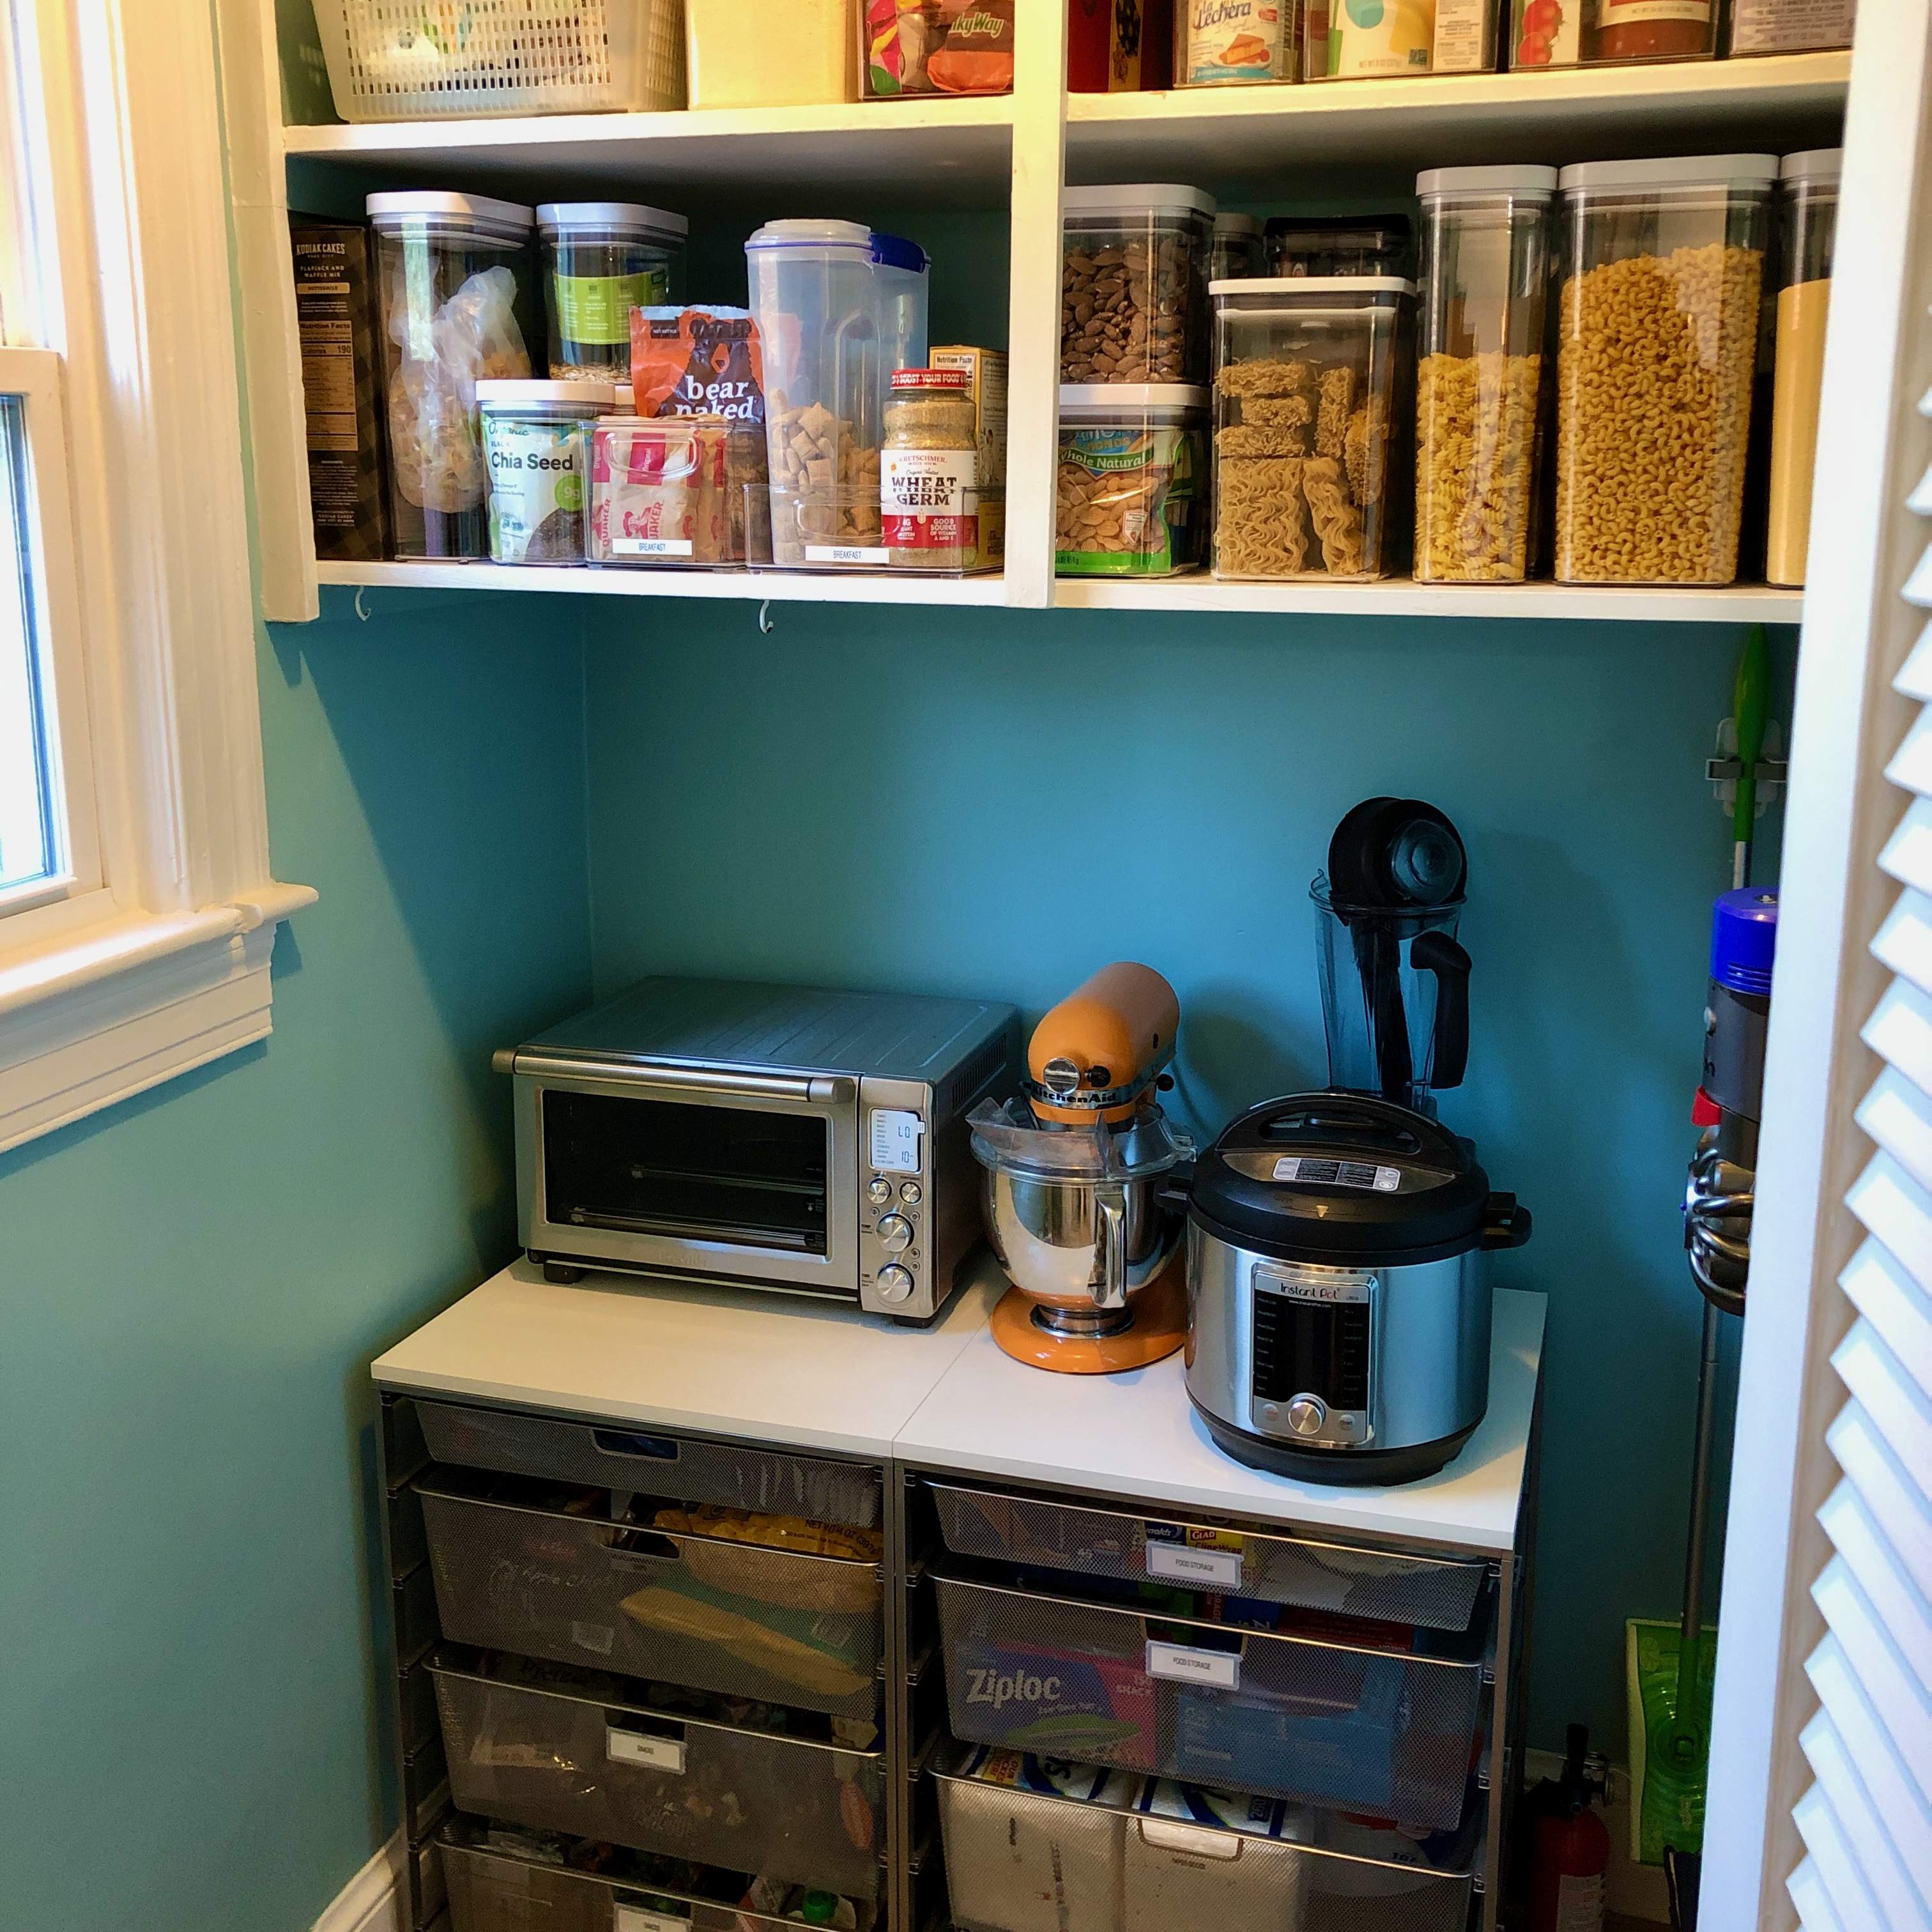 Organized kitchen pantry with Elfa shelving system to hold small appliances; food categories organized on shelves above